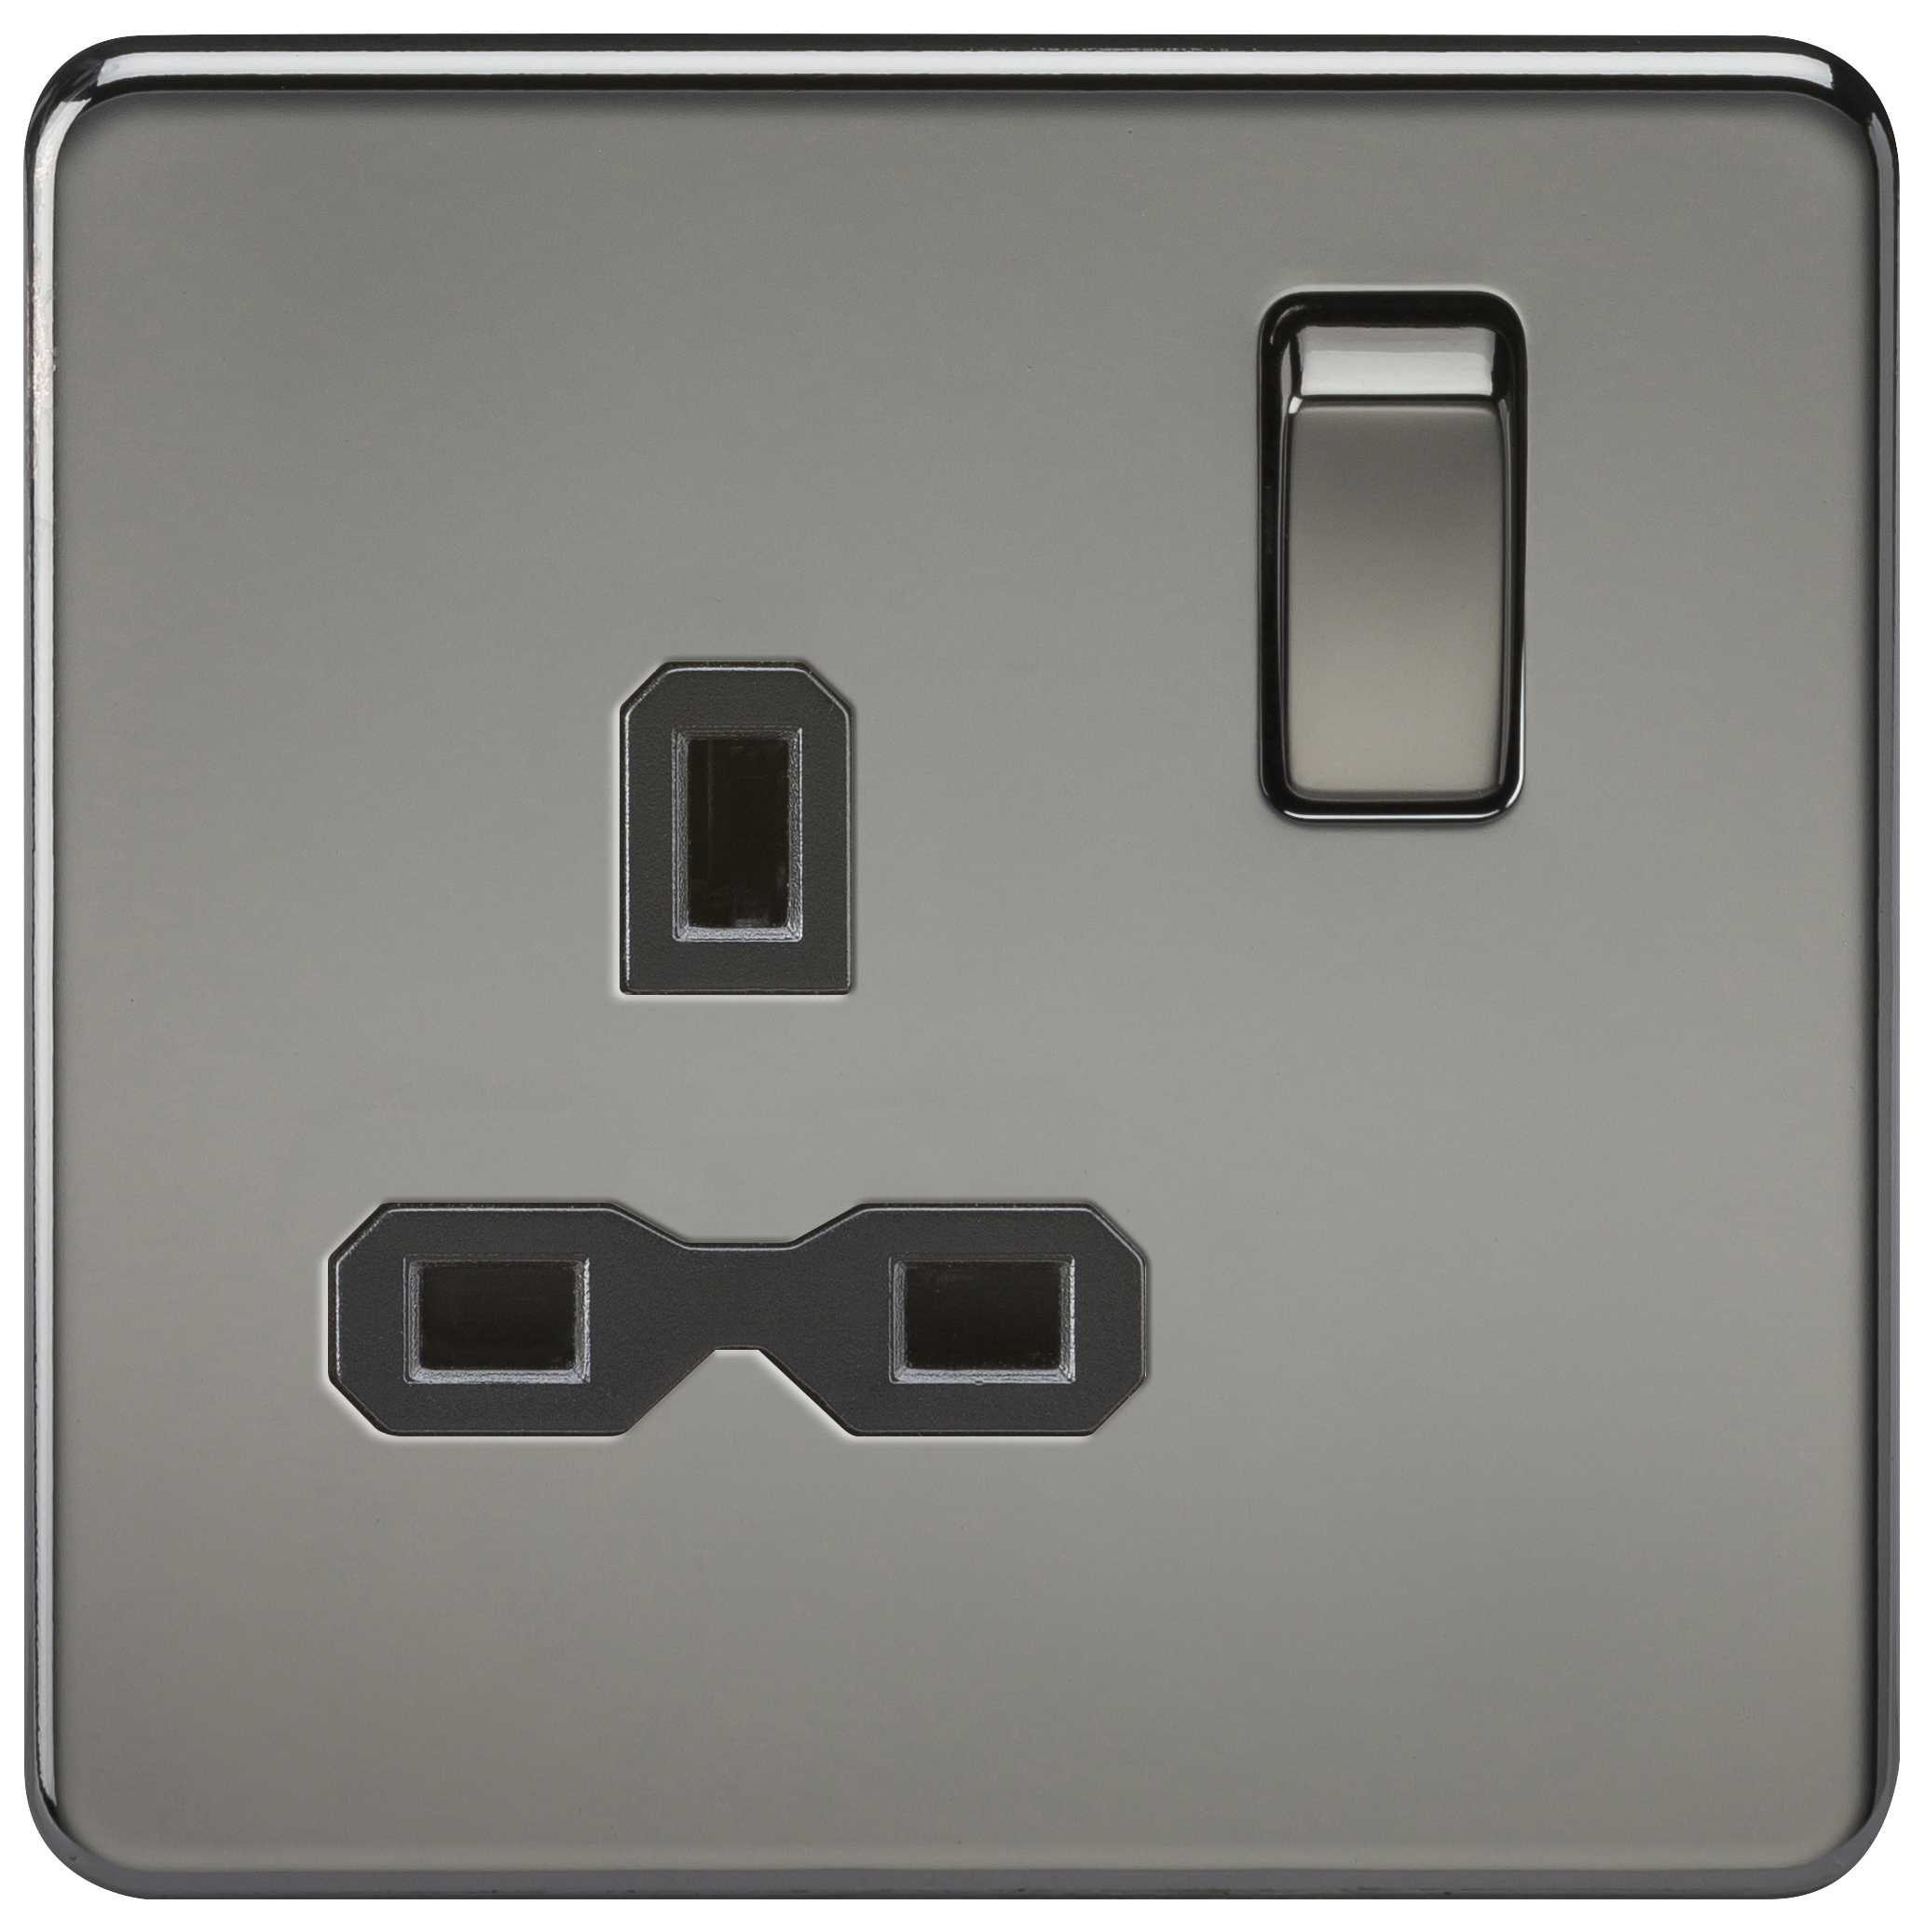 Screwless 13A 1G DP Switched Socket - Black Nickel With Black Insert - SFR7000BN 